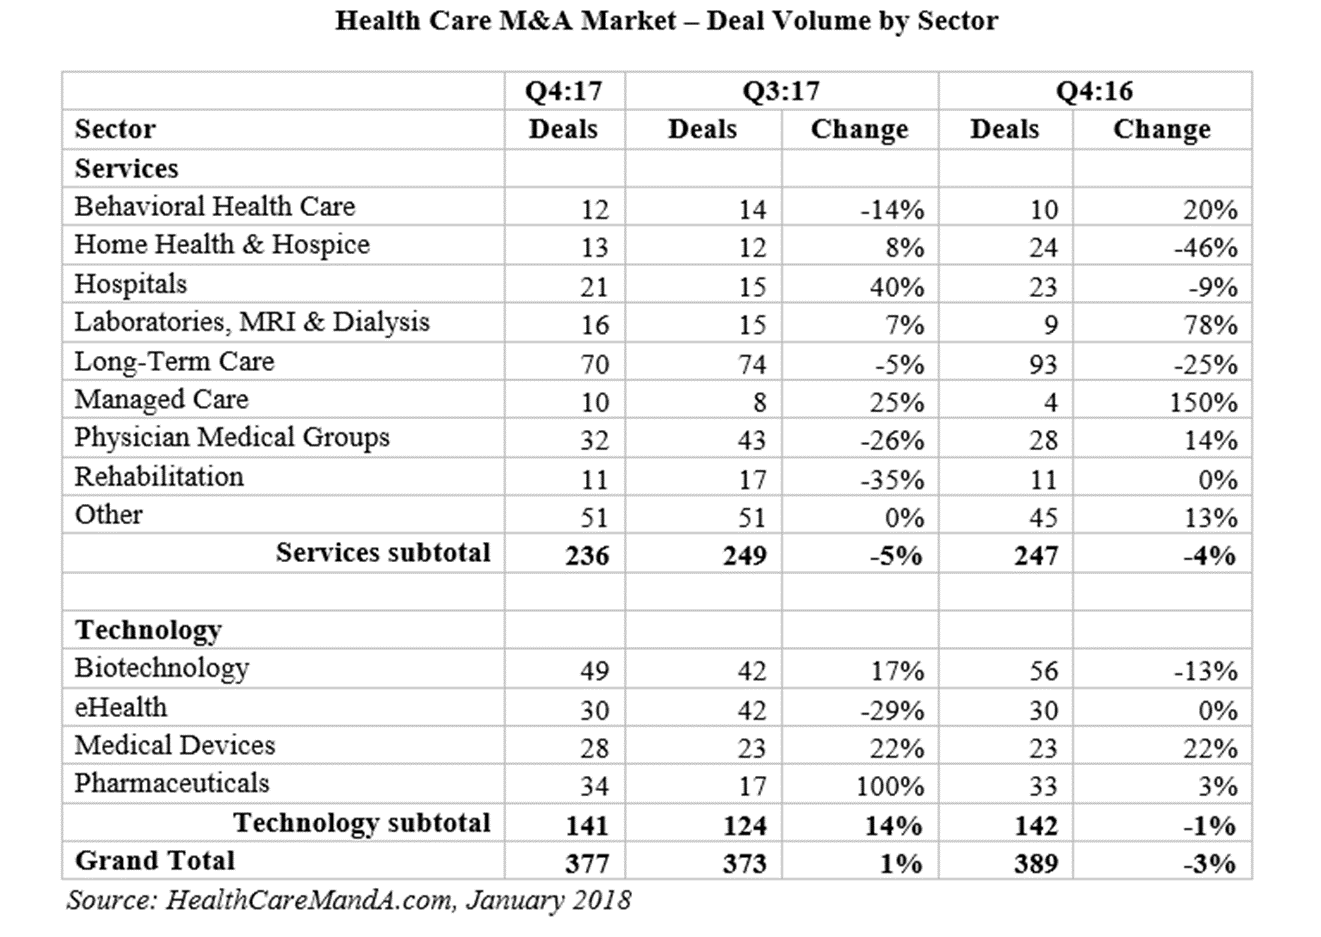 Health Care M&A Market - Deal Volume by Sector